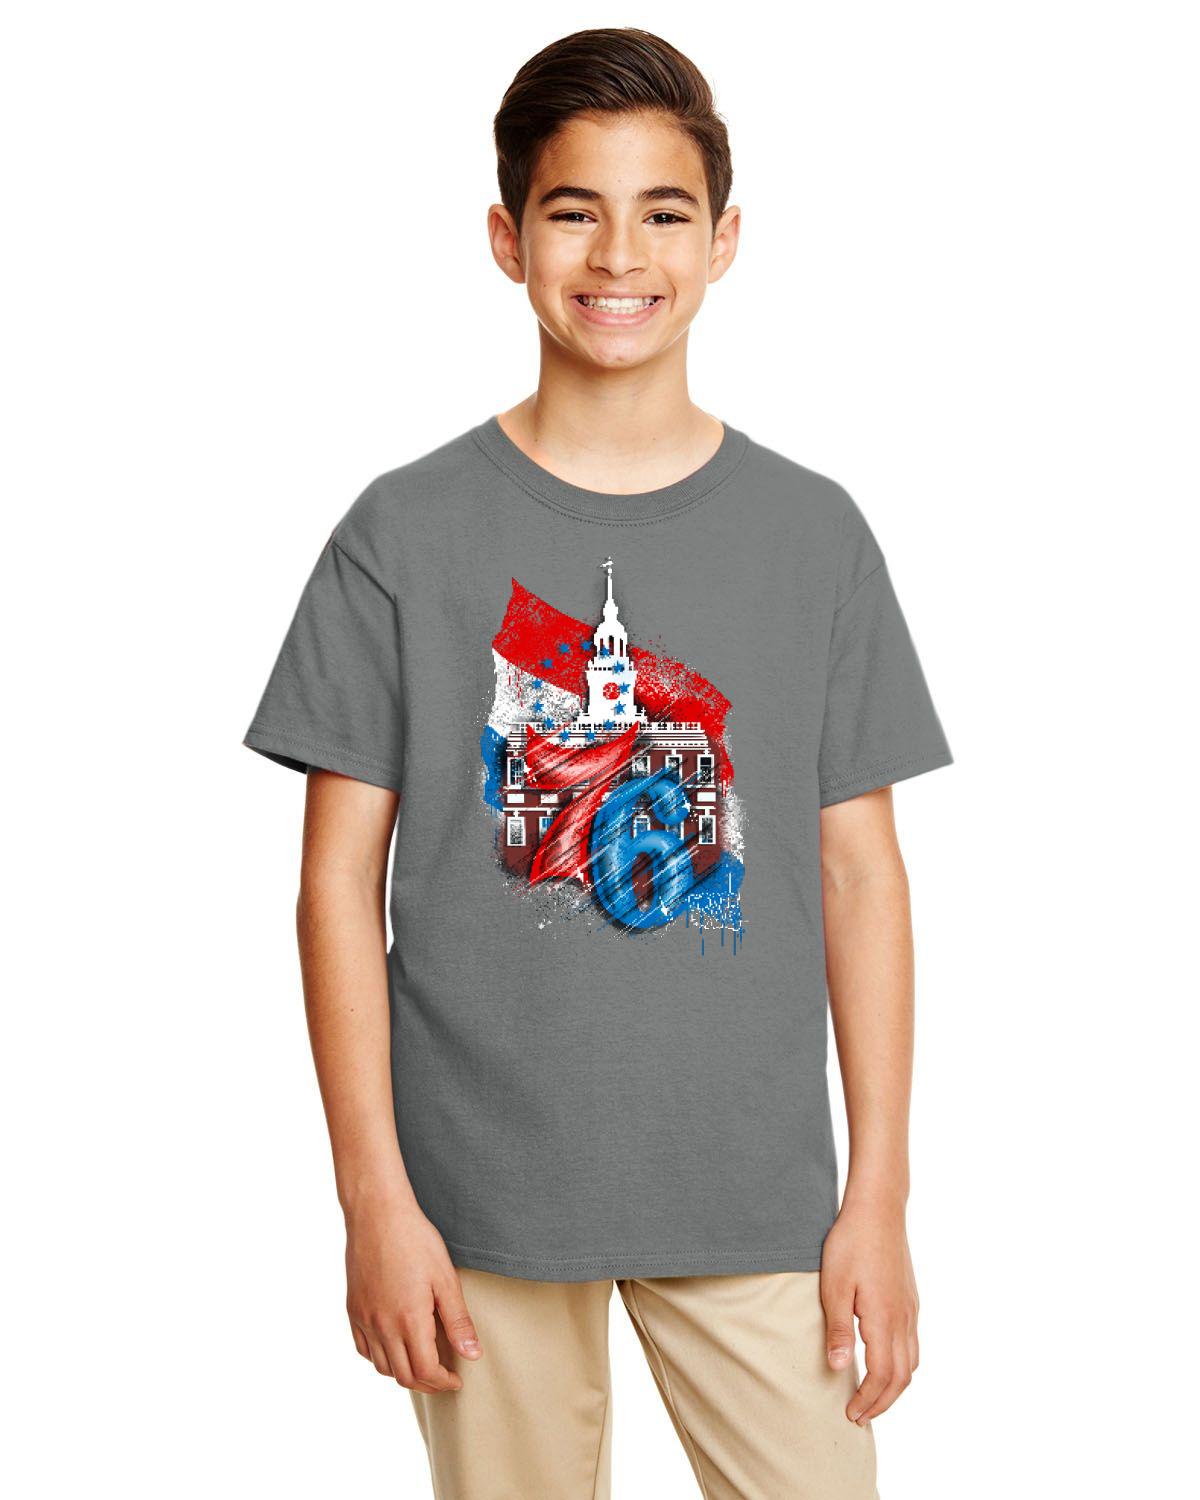 76ers Independence Youth Tee (Gildan Youth Softstyle 7.5 oz./lin. yd. T-Shirt | G645B)